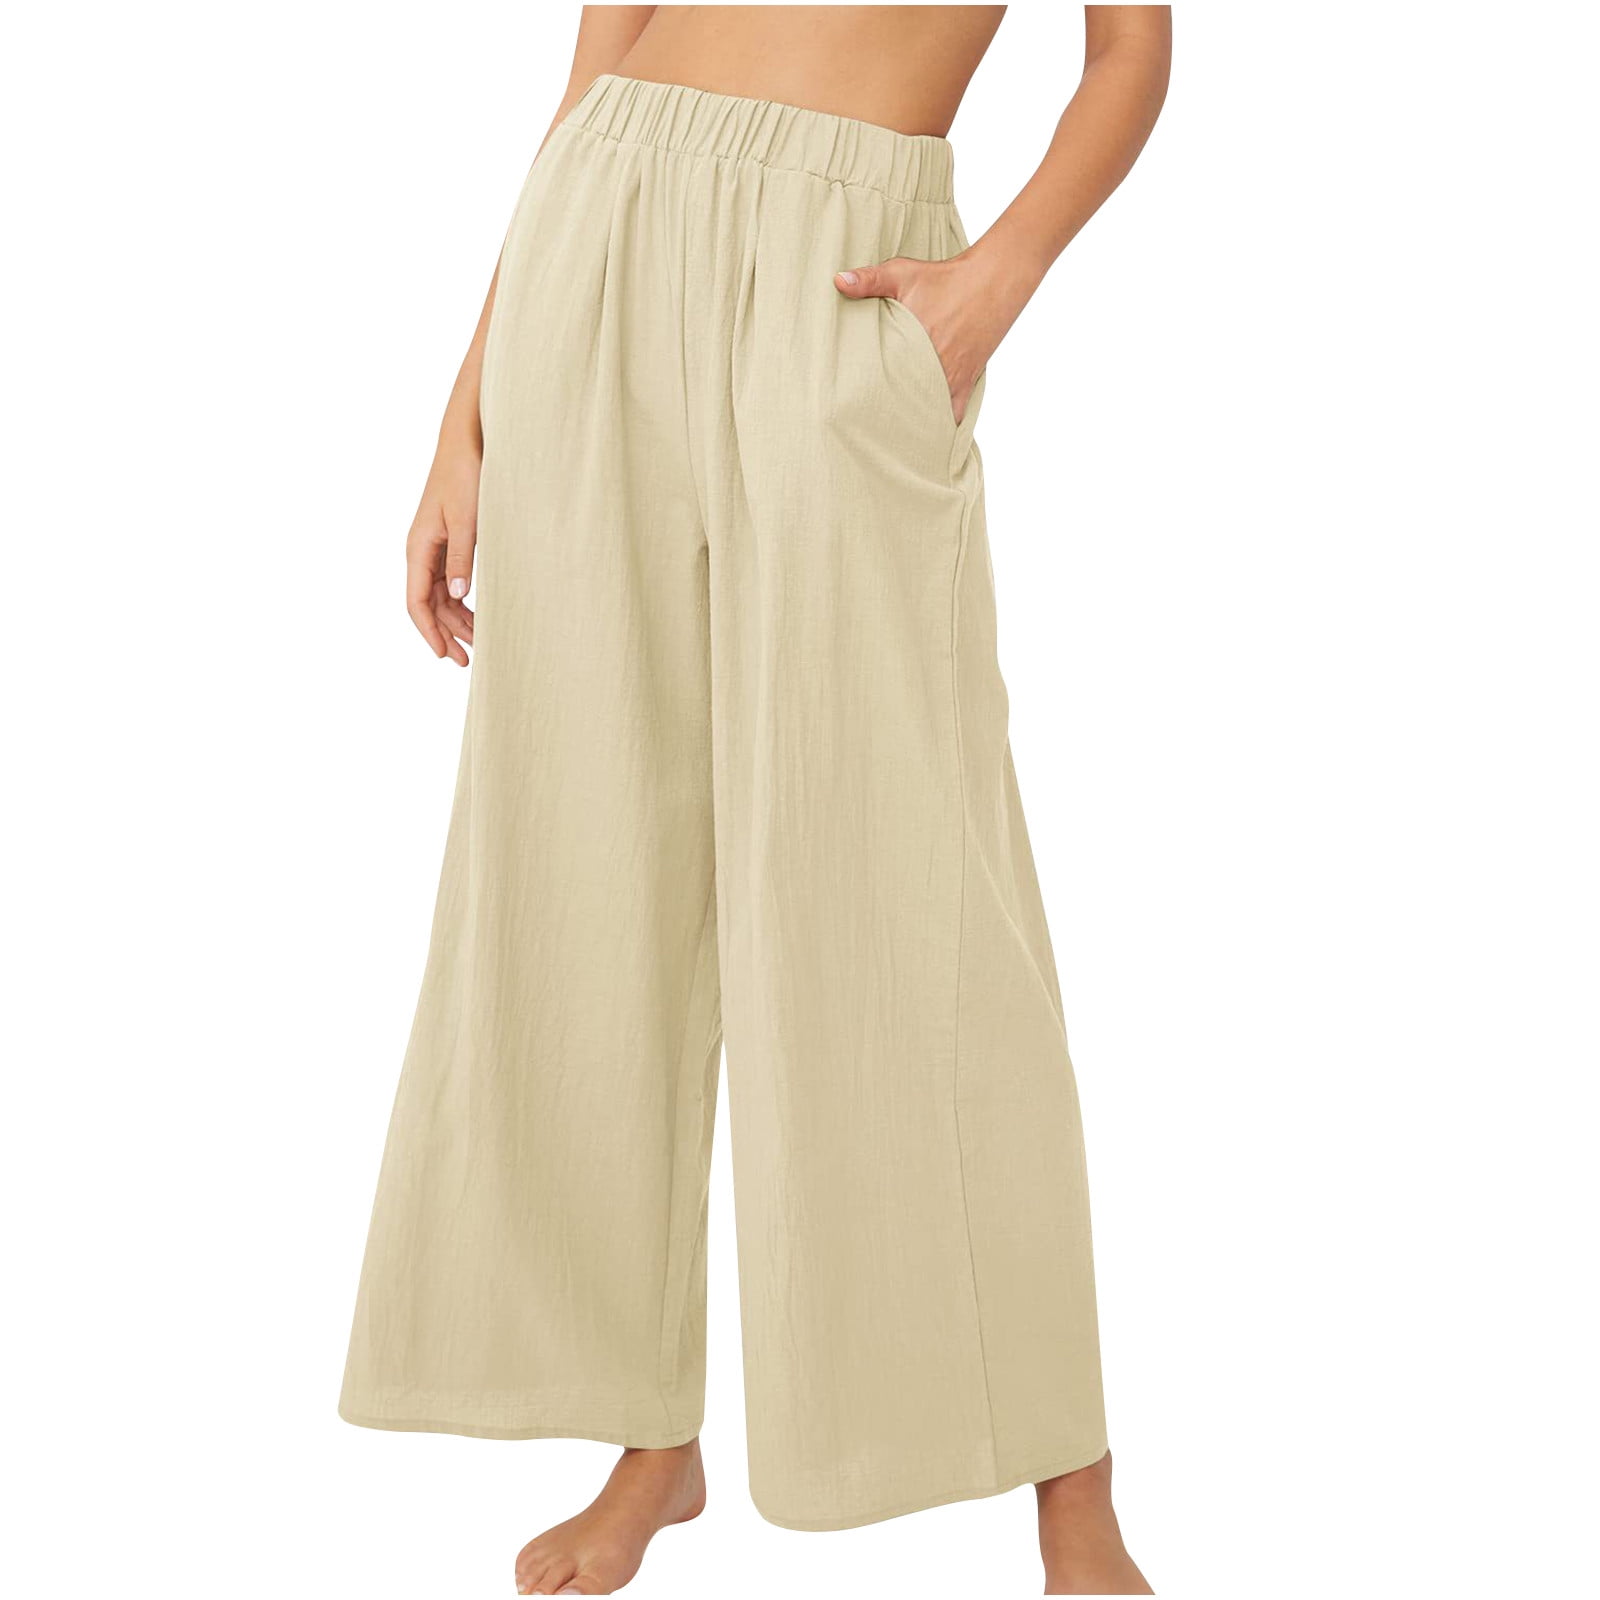 Women's Casual Wide Leg Pants Summer Solid Elastic Waist Loose Fit Yoga  Palazzo Pants with Pockets Comfy Plus Size Trousers(Khaki; L) 